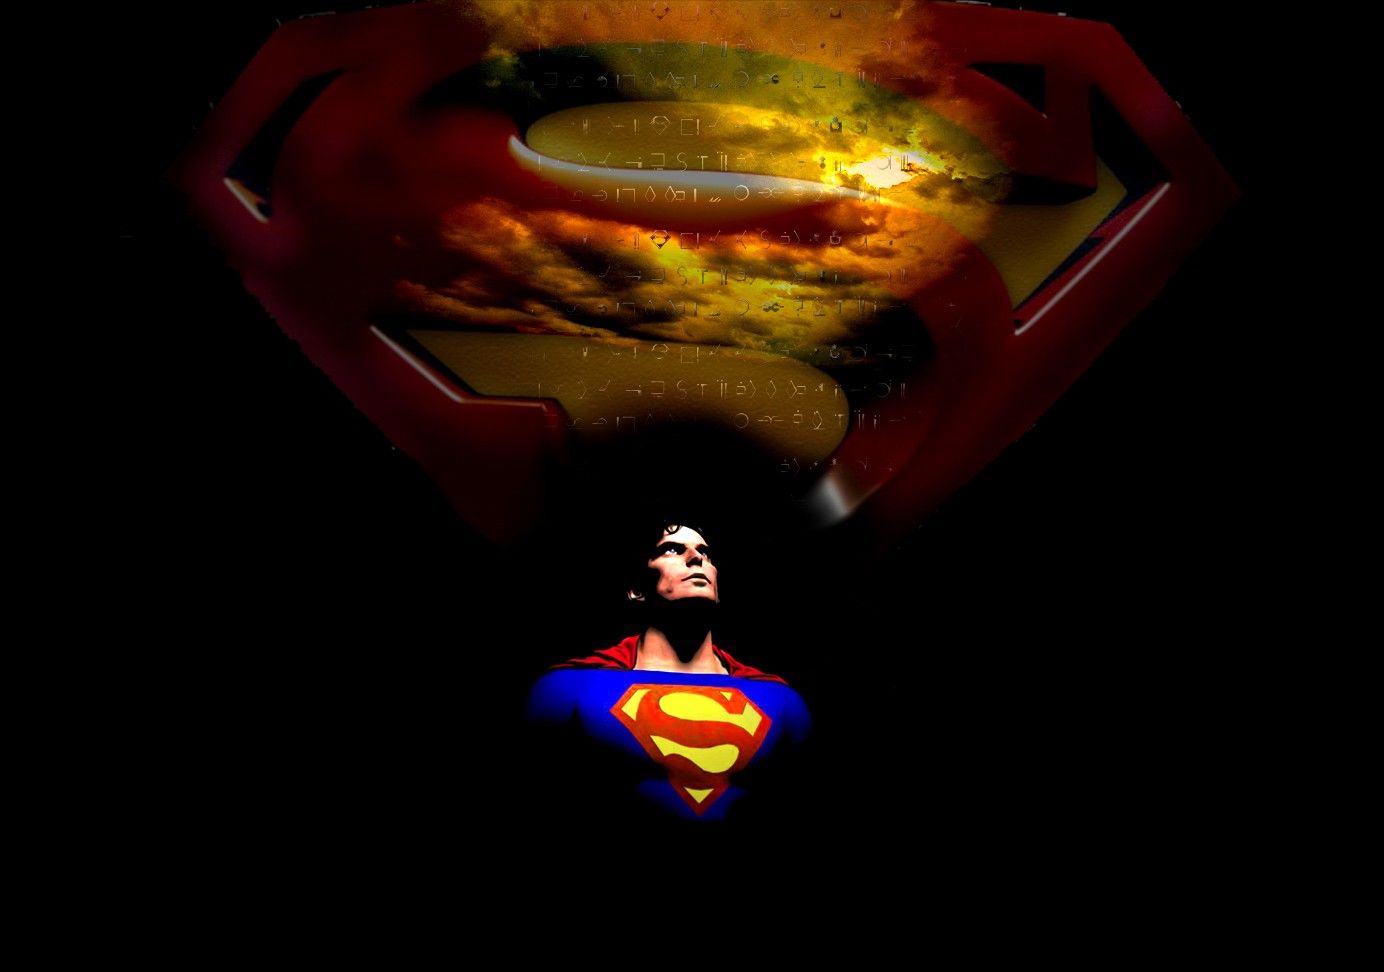 Superman-Wallpapers-for-Samsung-Galaxy-S3-1.jpg